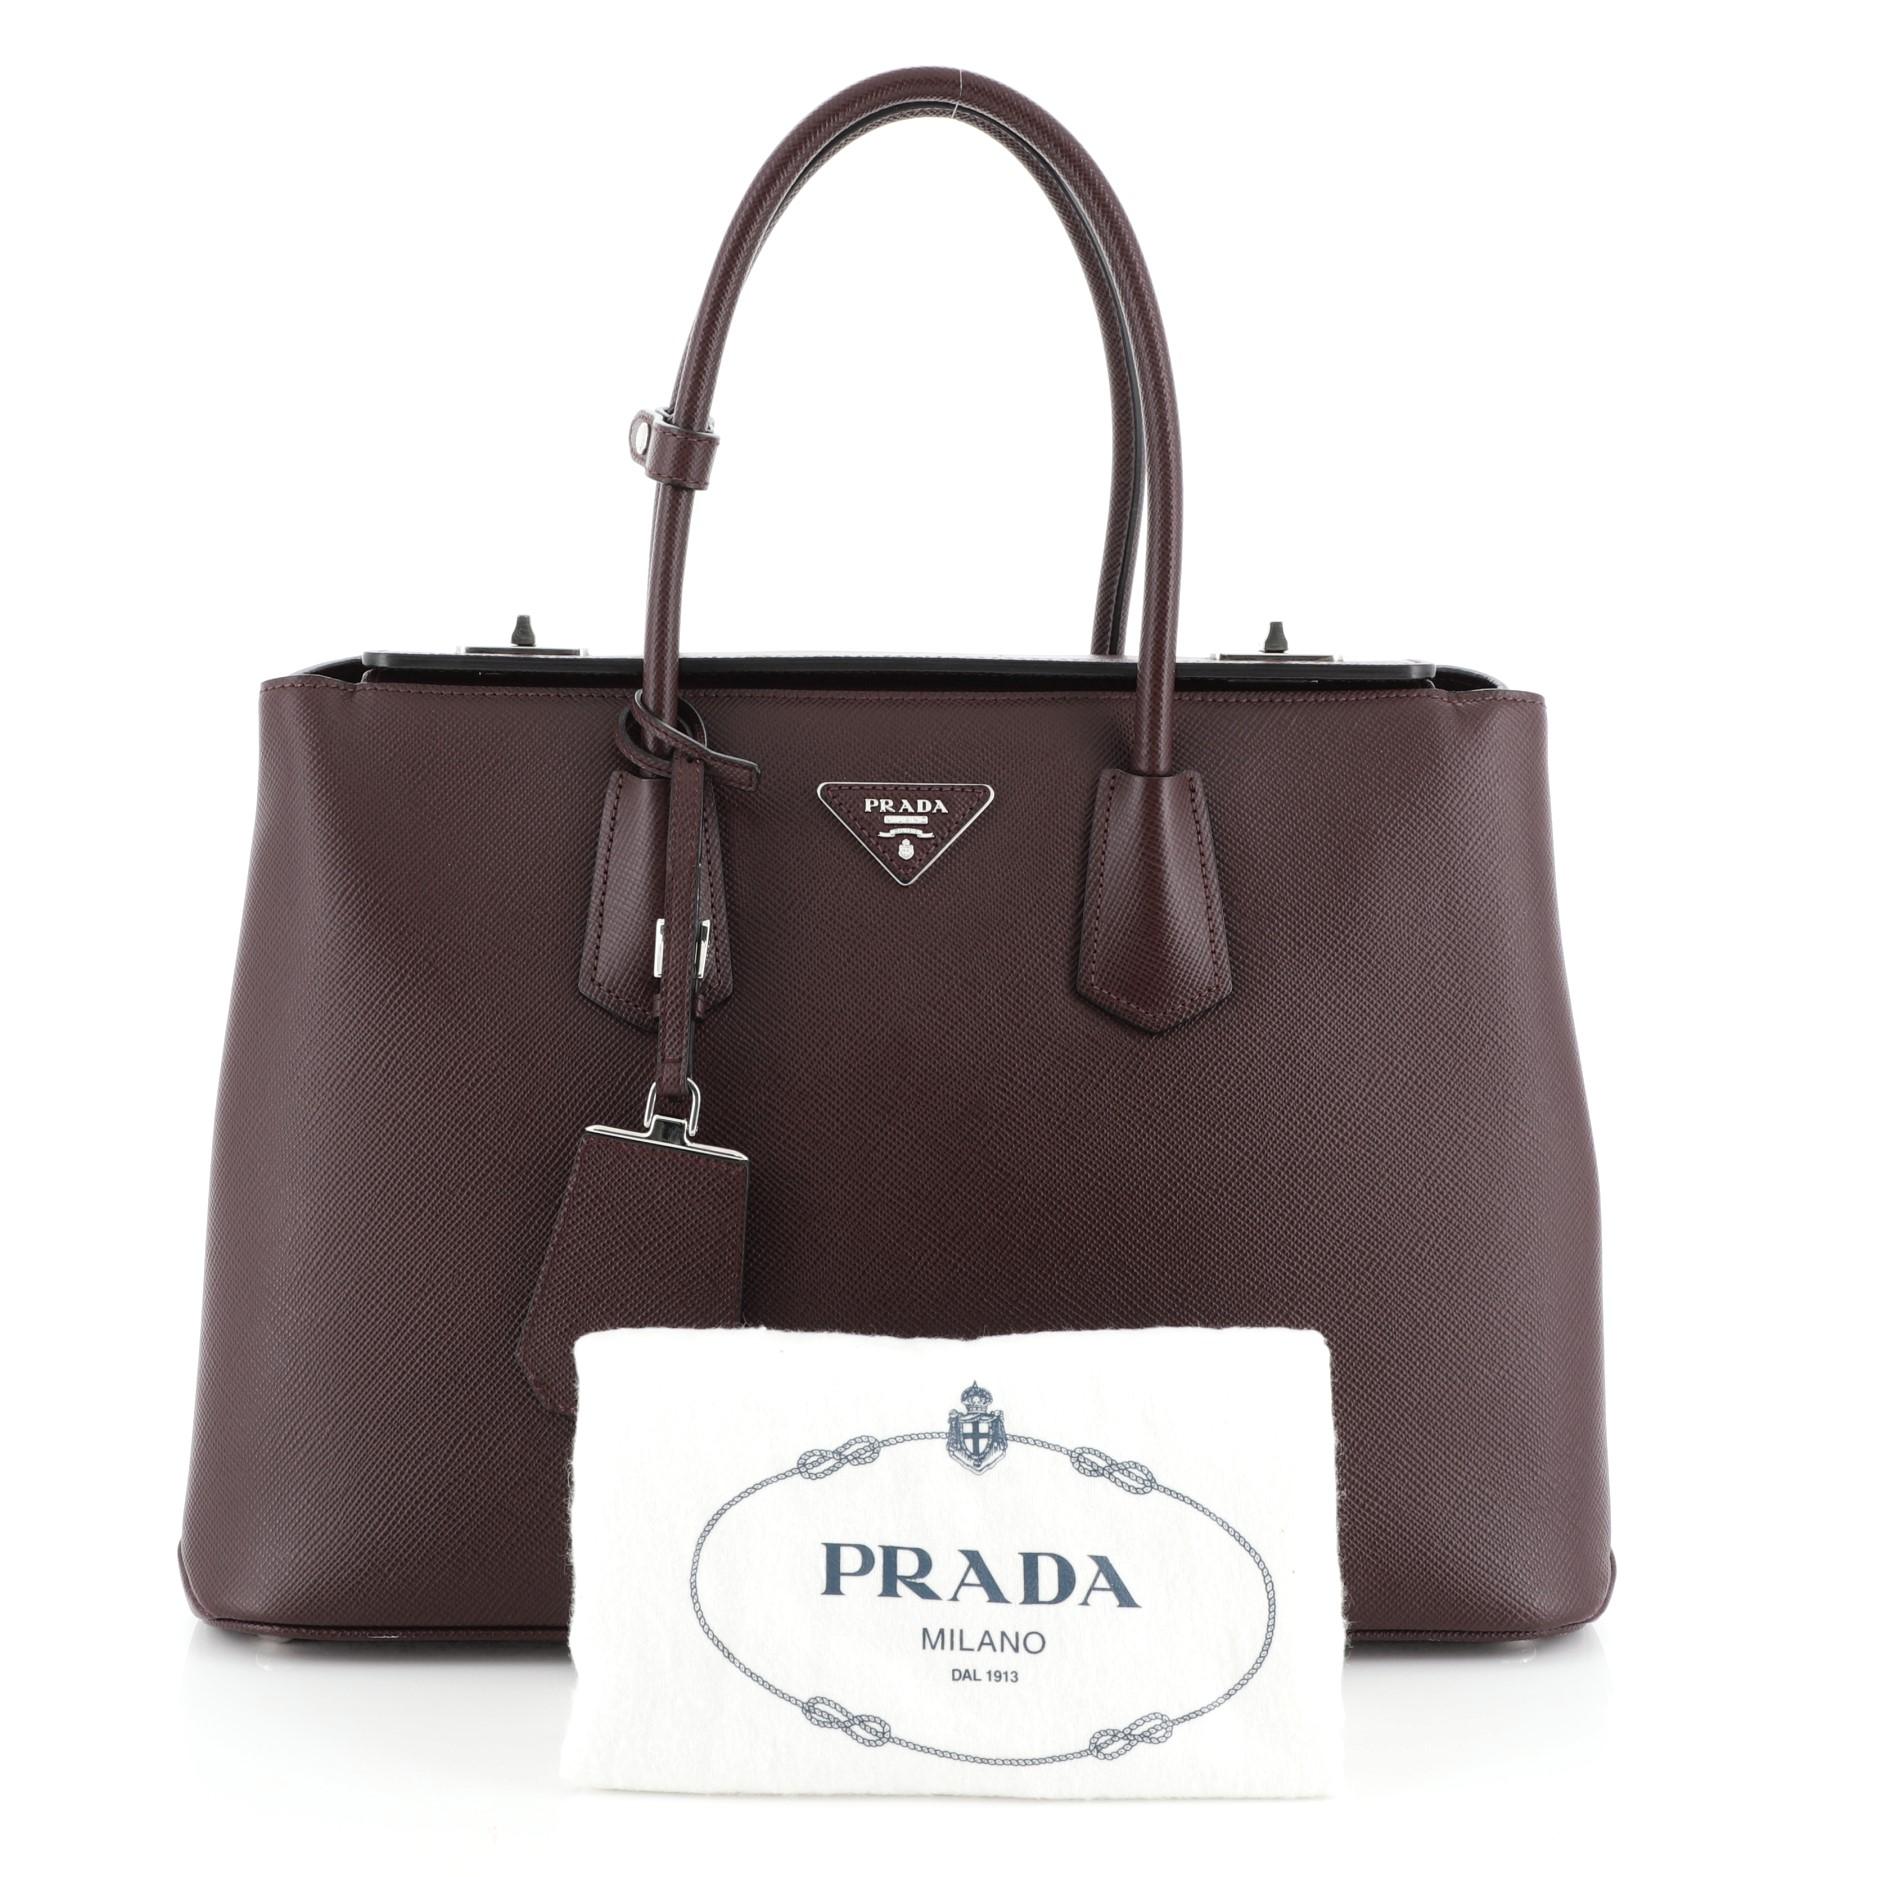 This Prada Turnlock Cuir Twin Tote Saffiano Leather Medium, crafted in red saffiano leather, features dual rolled leather handles, protective base studs, and silver-tone hardware. Its dual turn-lock closure opens to a black and red leather interior